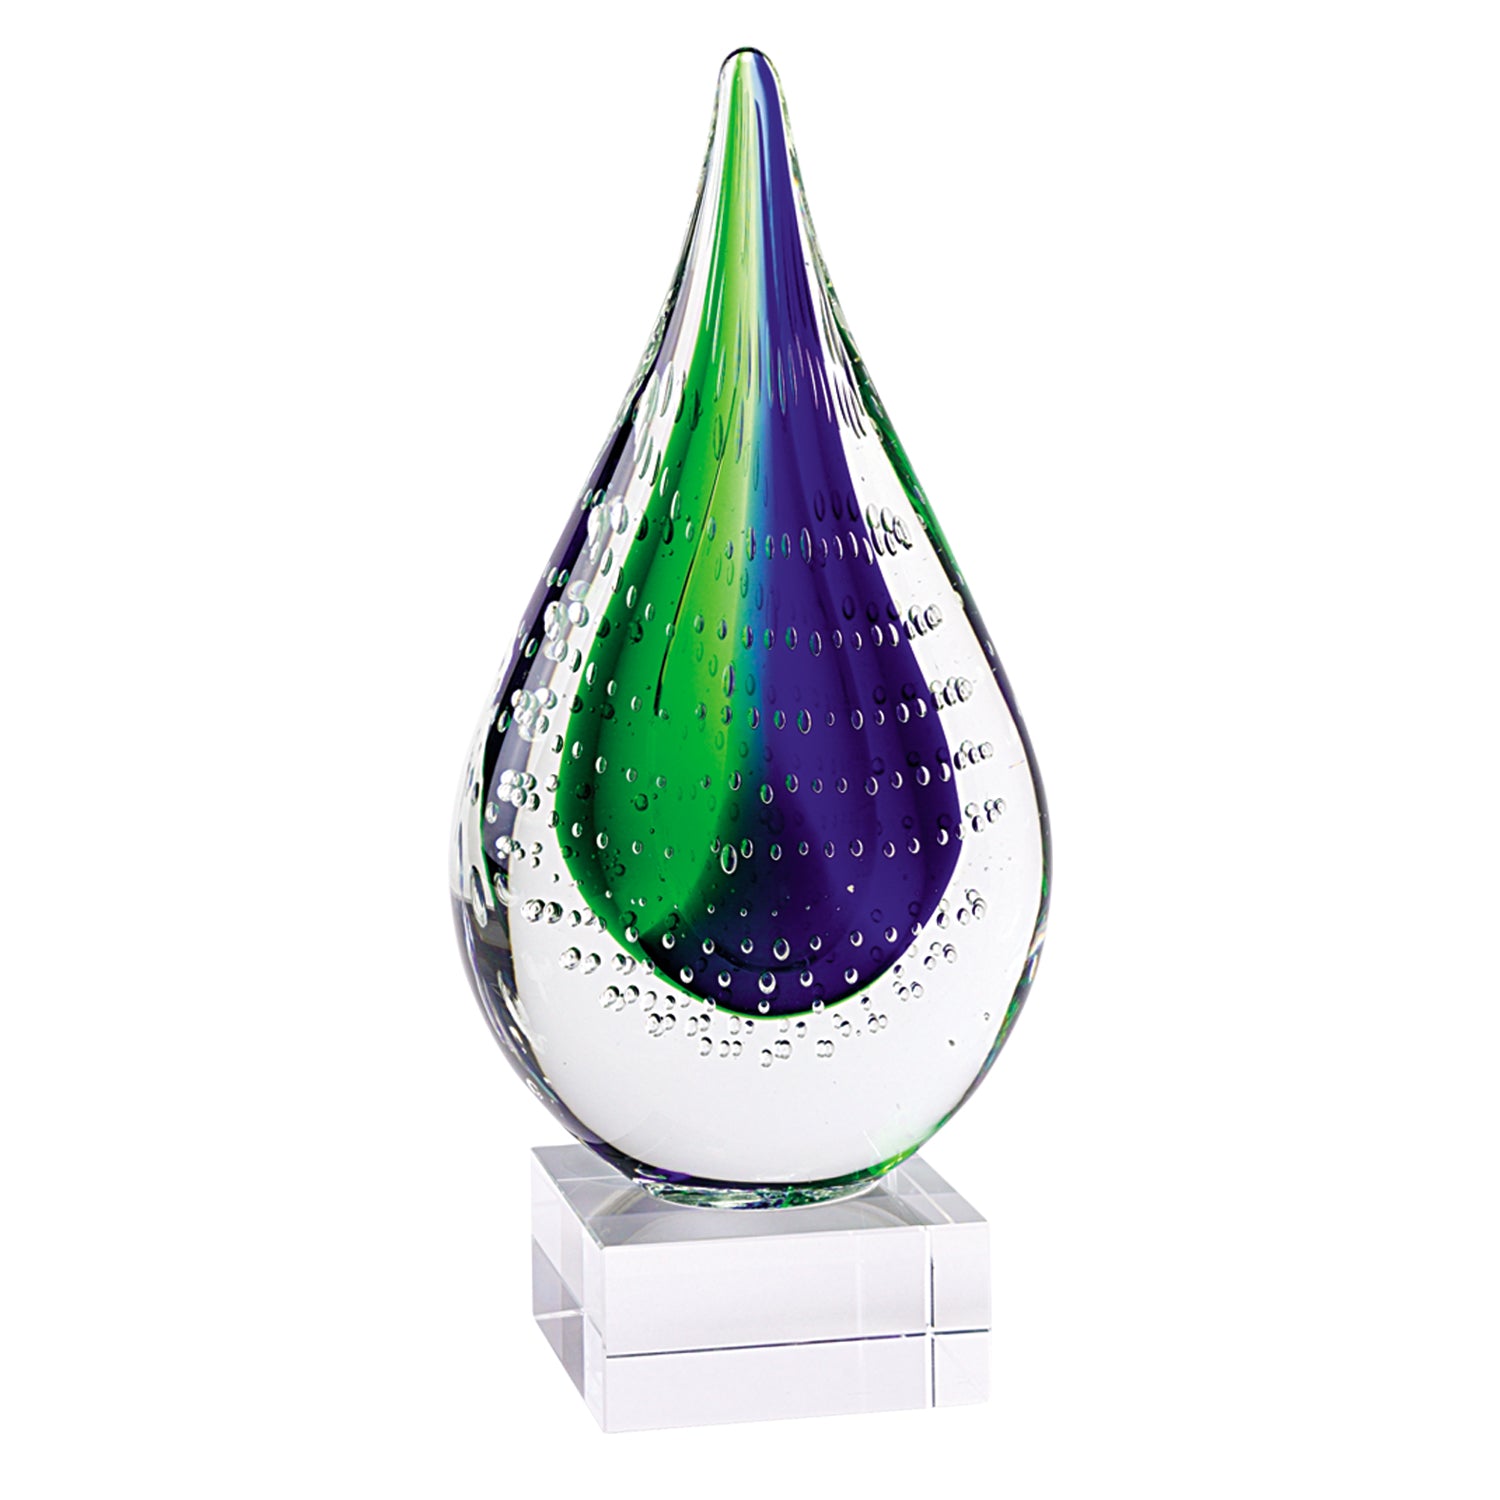 9" Clear Blue and Green Murano Glass Modern Abstract Tabletop Sculpture